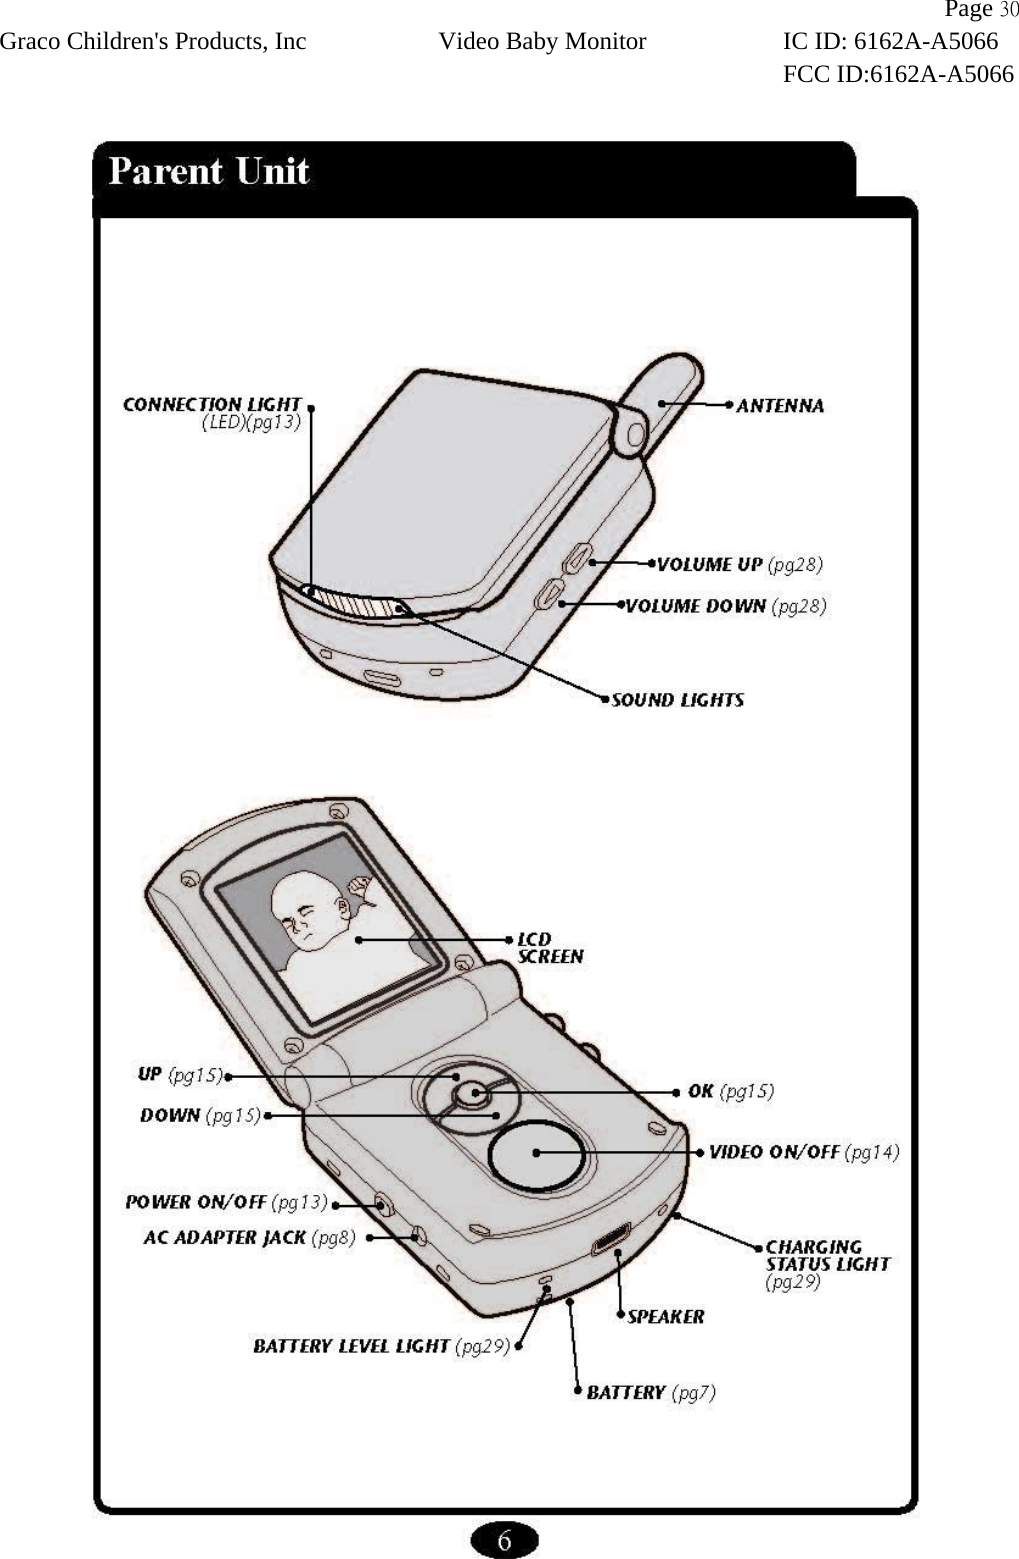                Page 30 Graco Children&apos;s Products, Inc Video Baby Monitor IC ID: 6162A-A5066 FCC ID:6162A-A5066   